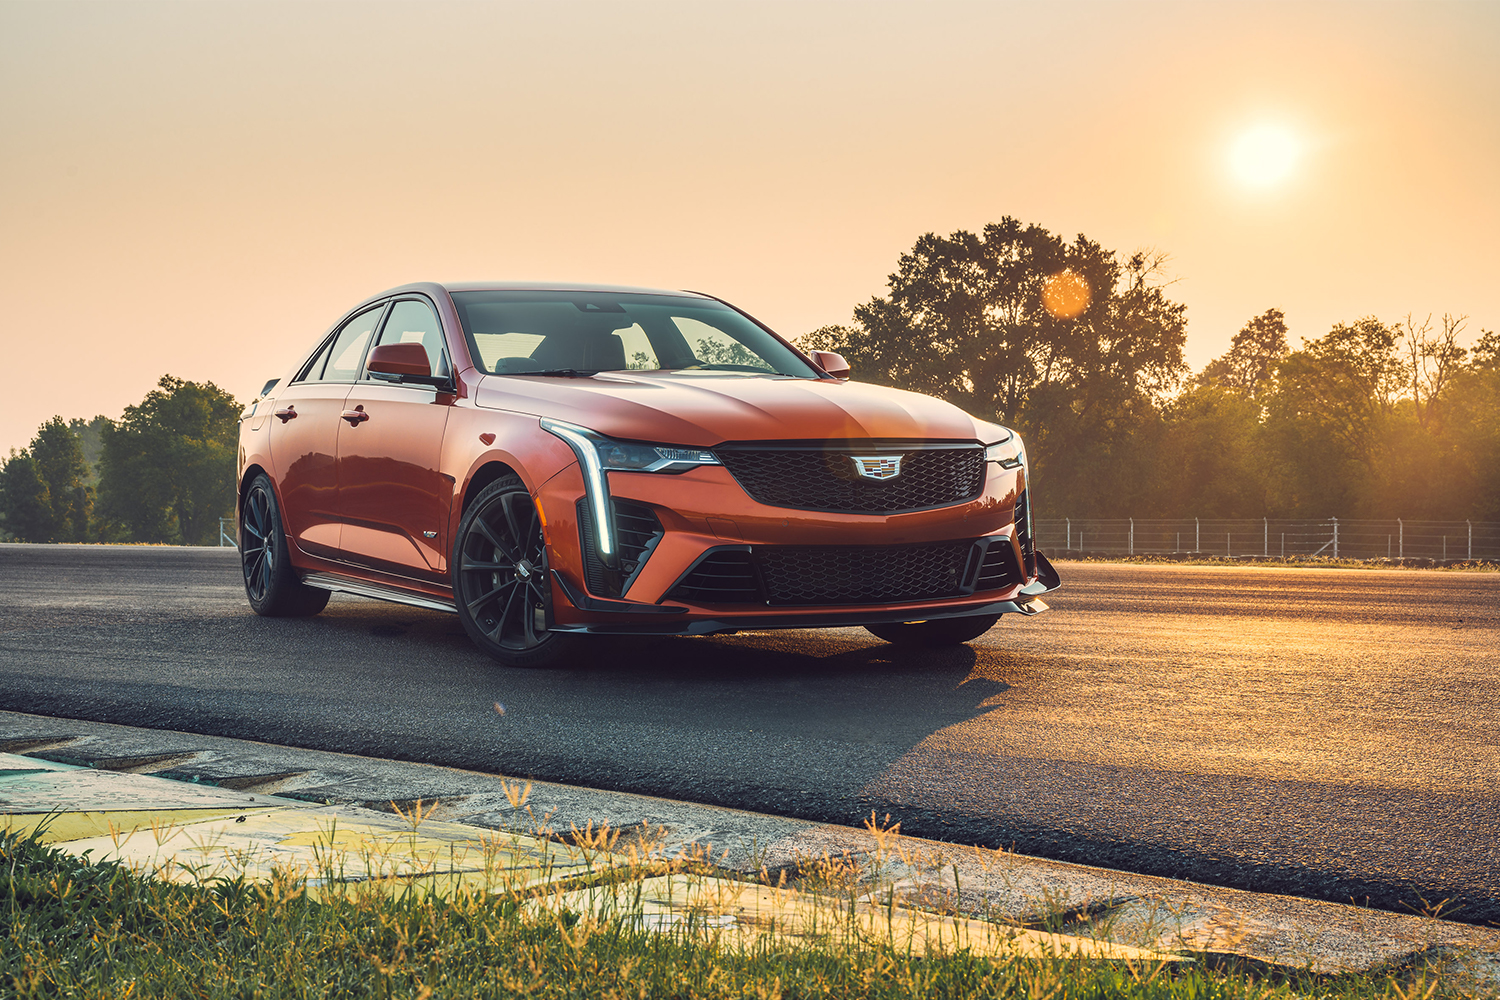 The Cadillac CT4-V Blackwing in orange sitting on a track with the sun setting in the background. We reviewed the 2022 V6 sport sedan and its sibling the CT5-V Blackwing.